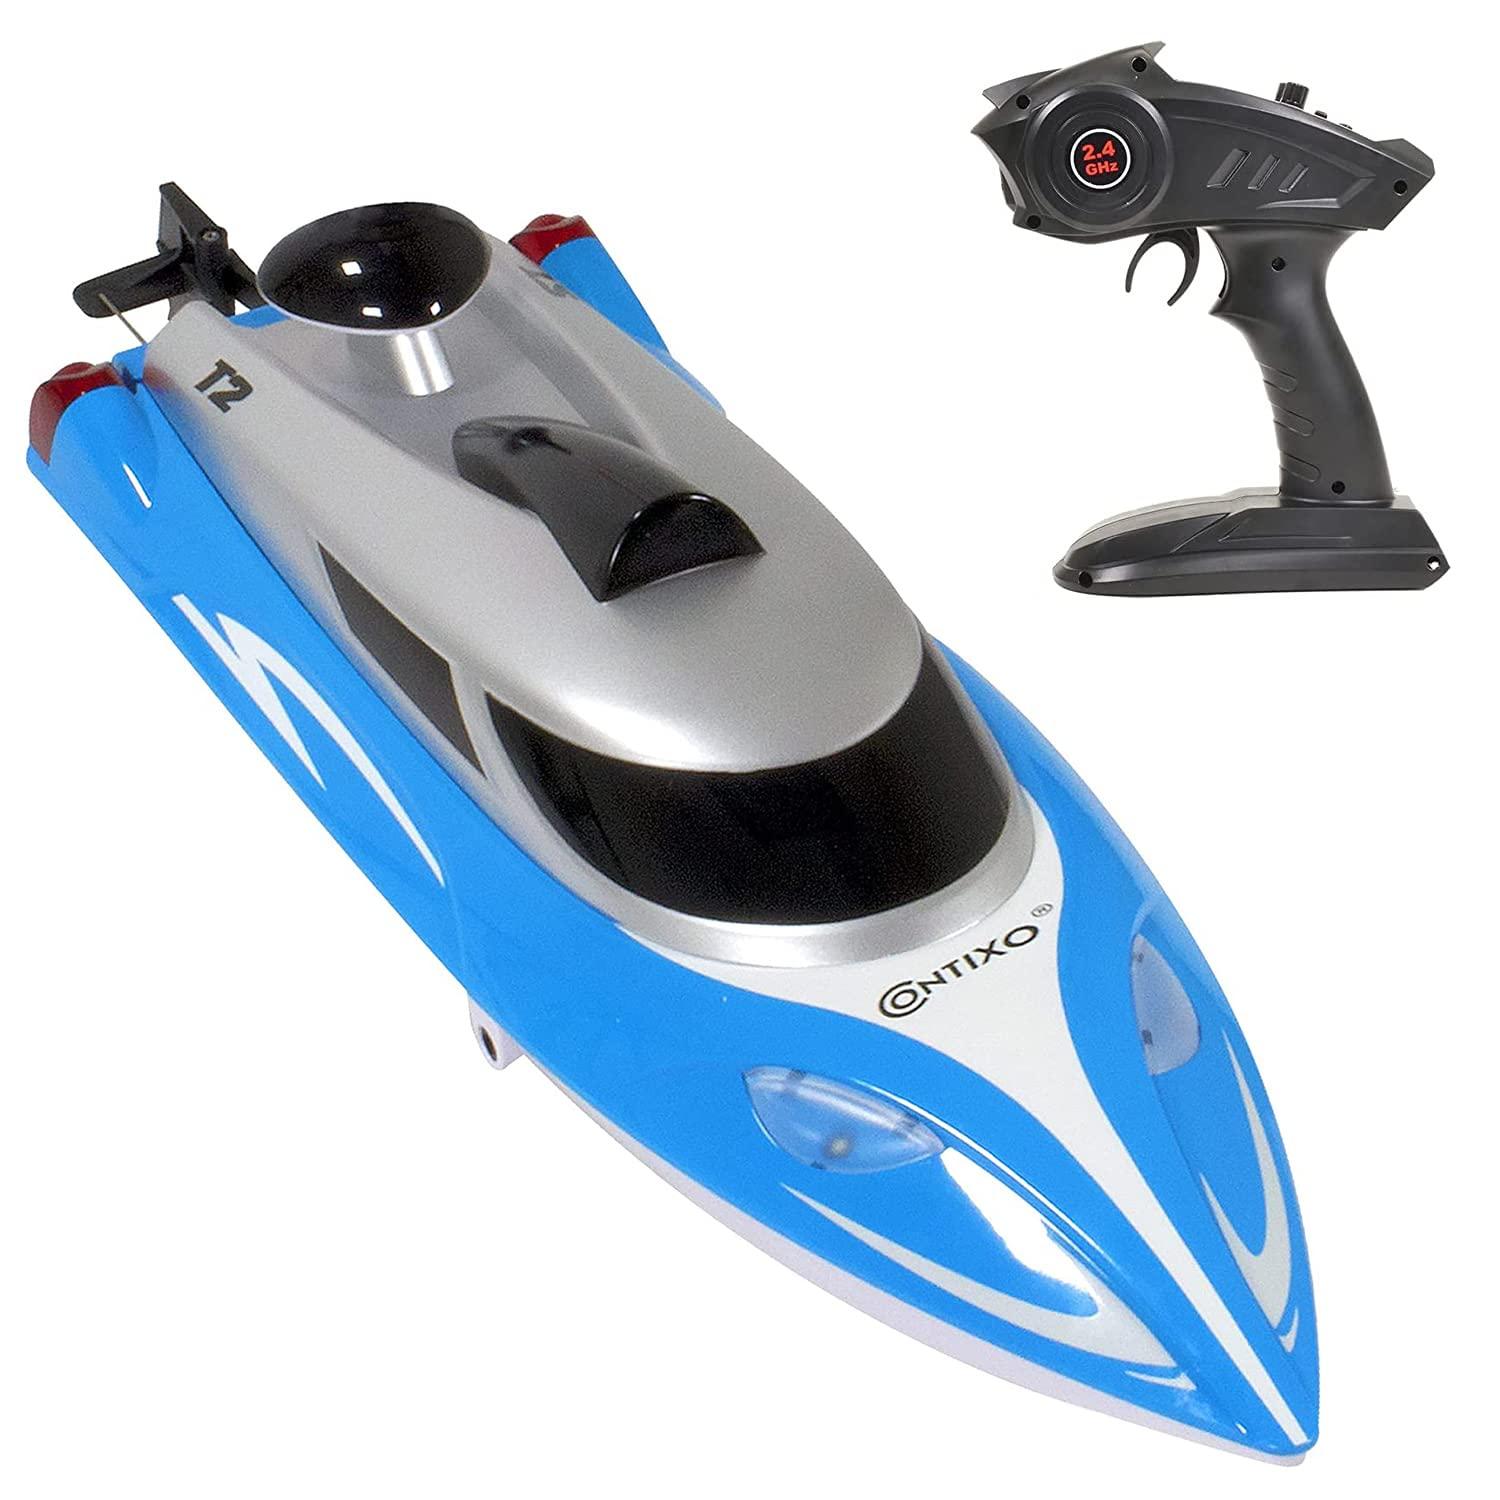 Fastrcboats: Factors to Consider When Buying a Fastrcboat